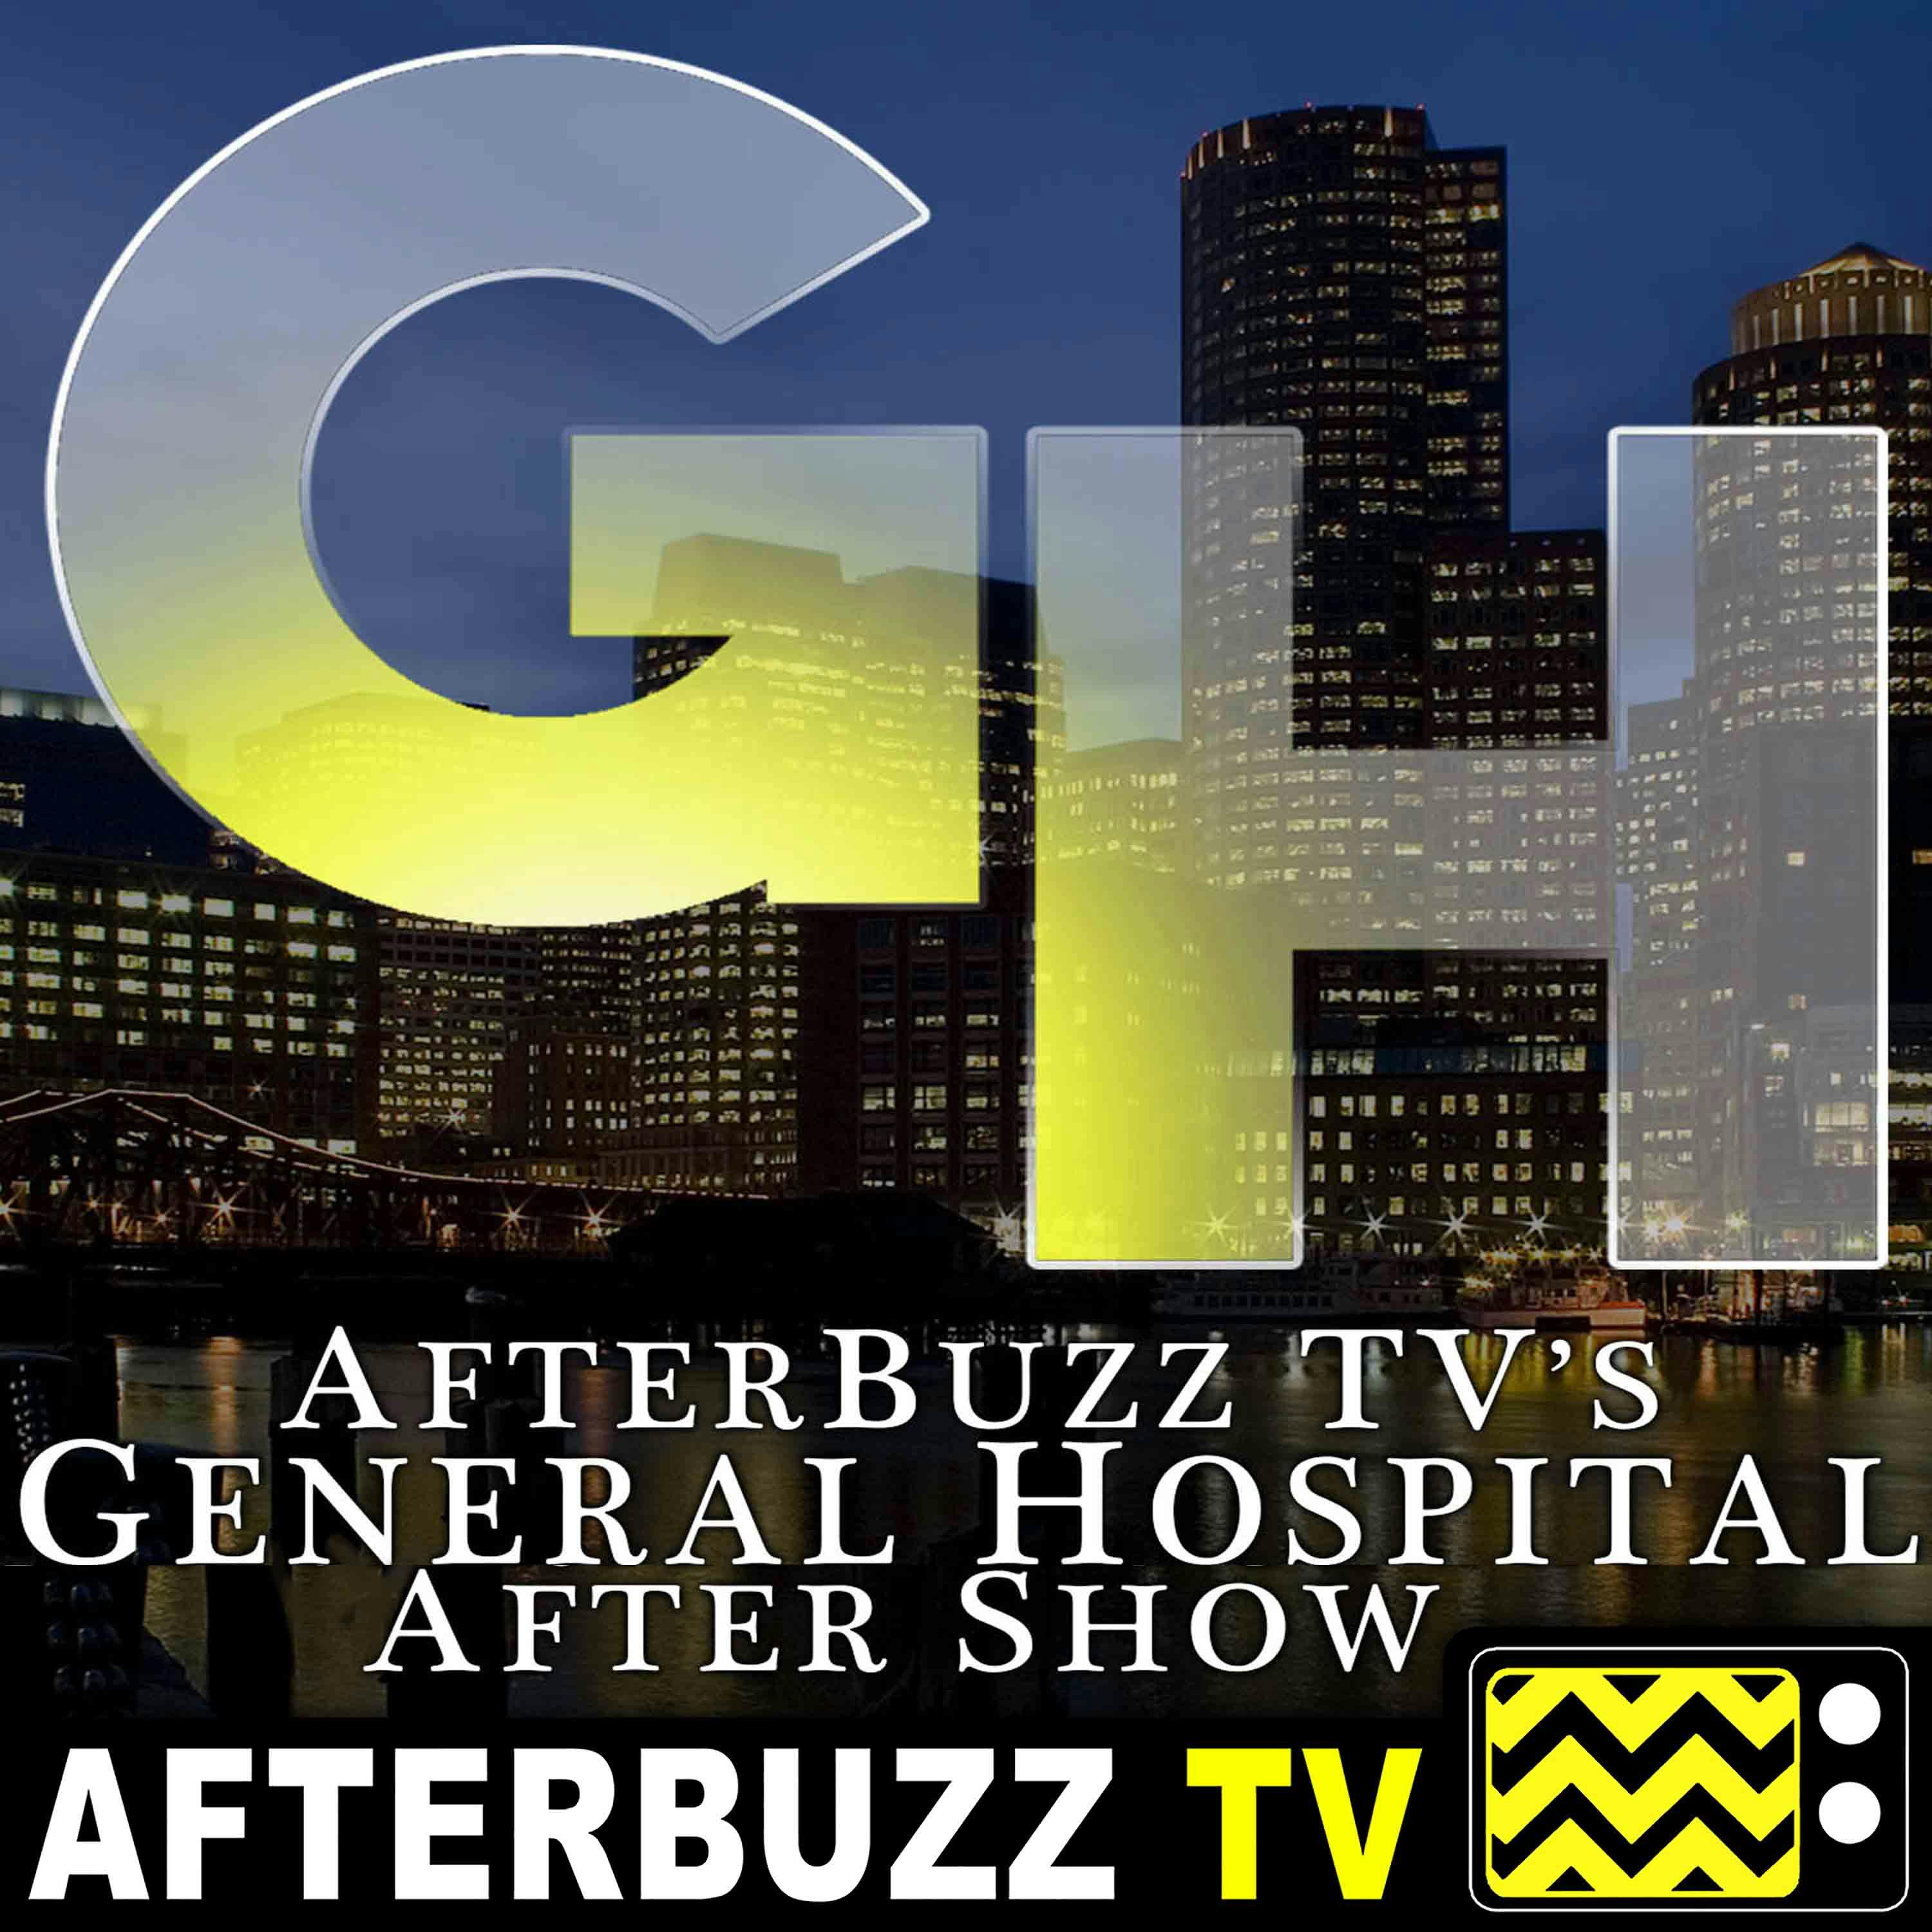 Review Of General Hospital for December 10th - December 14th, 2018